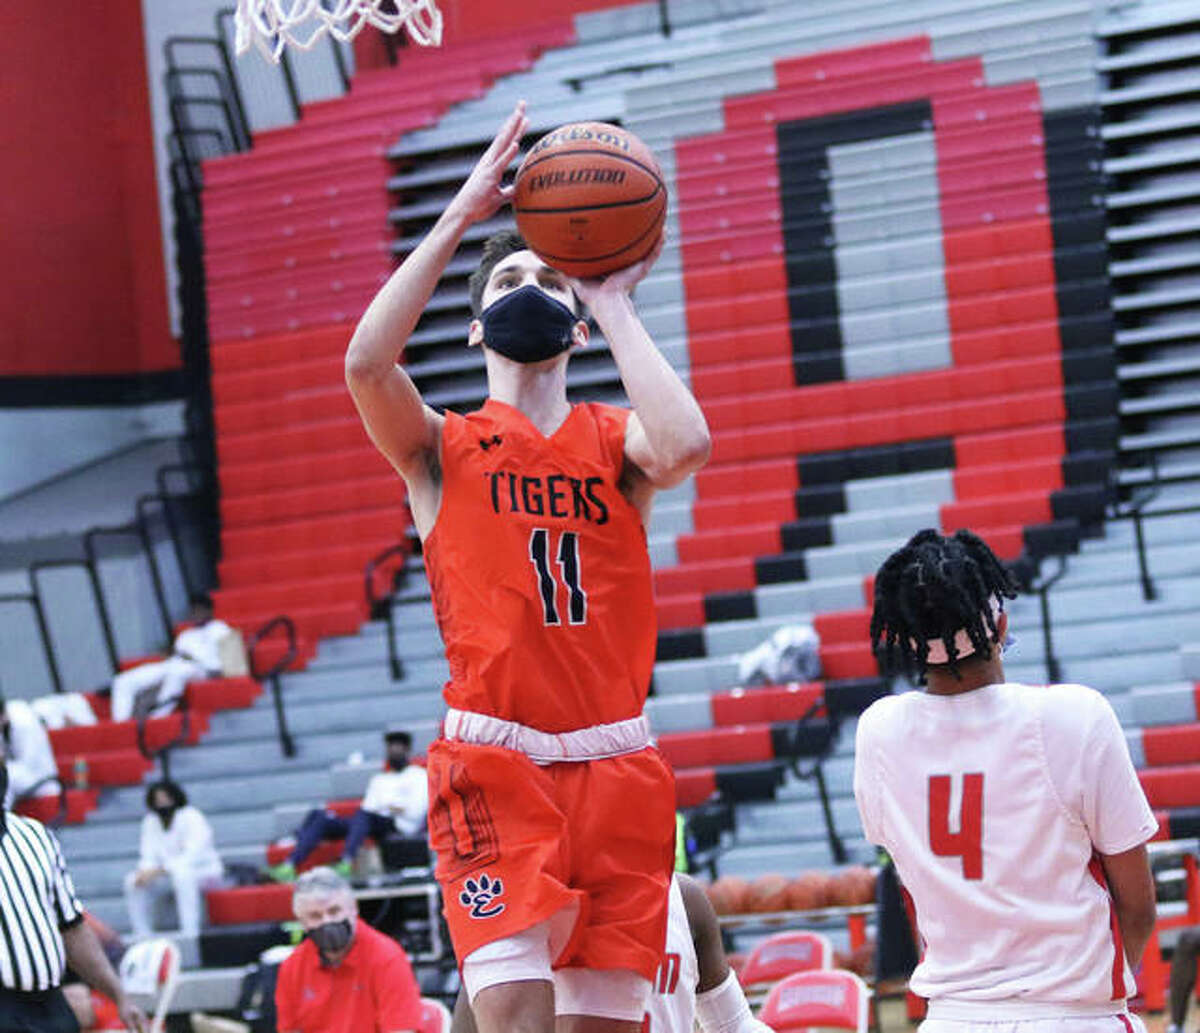 Edwardsville’s Brennan Weller (11) sidesteps Alton’s Lathan O’Quinn and scores two of his 30 points in Saturday’s SWC win over the Redbirds at Alton High in Godfrey. Weller joined the Tigers’ 1,000-points club with his 14th point in the game.